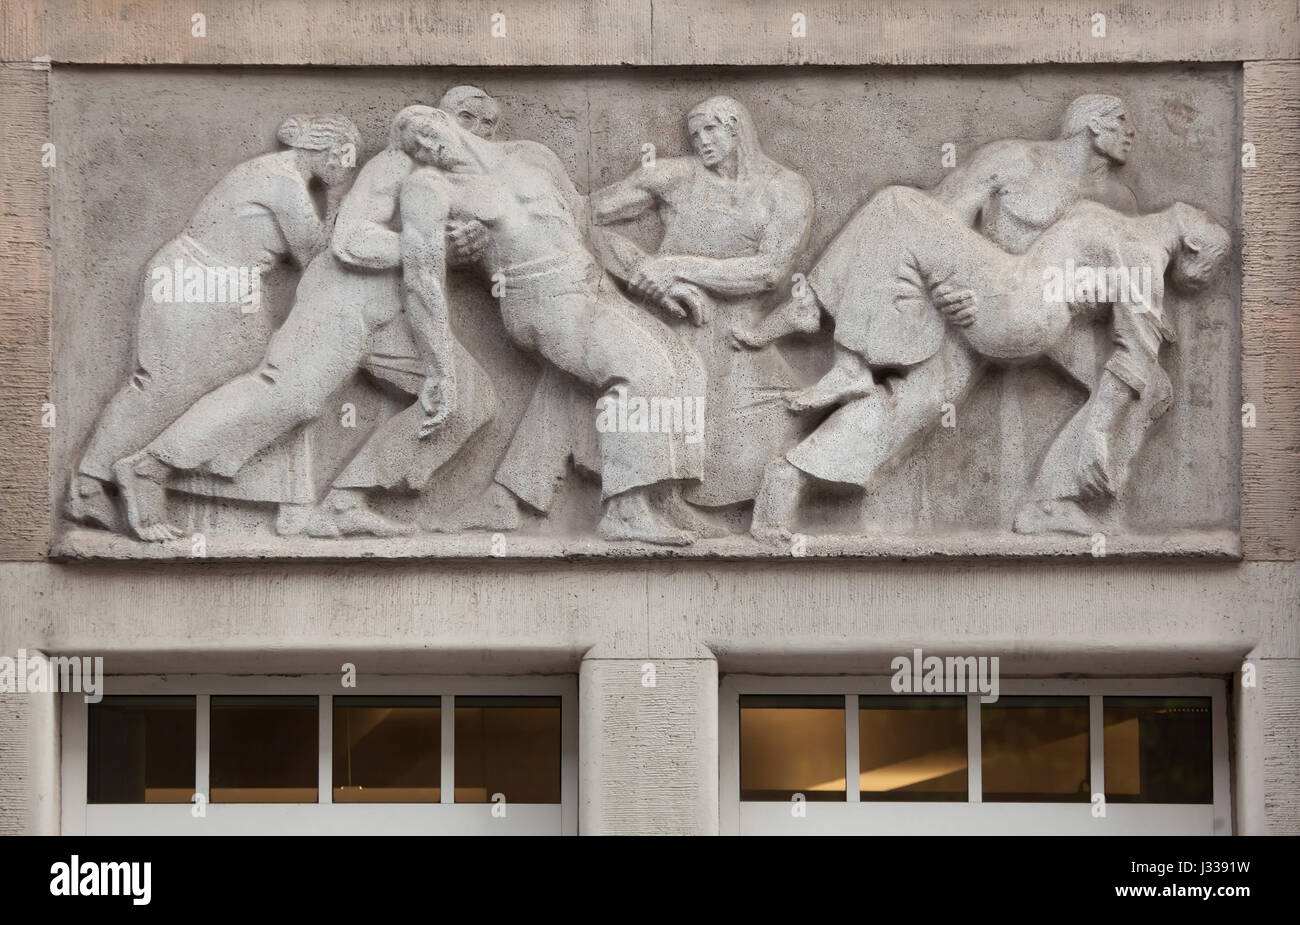 Rescuing of the injured workers. Relief by Hungarian sculptor Mihaly Biro on the south wing of the Art Nouveau building of the Budapest Workers Insurance Fund in Budapest, Hungary. The building, now used as the seat of the National Social Insurance Centre (OTI), was designed by Hungarian architects Marcell Komor and Dezso Jakab and built in 1913. The north wing was added in the 1930s. Stock Photo